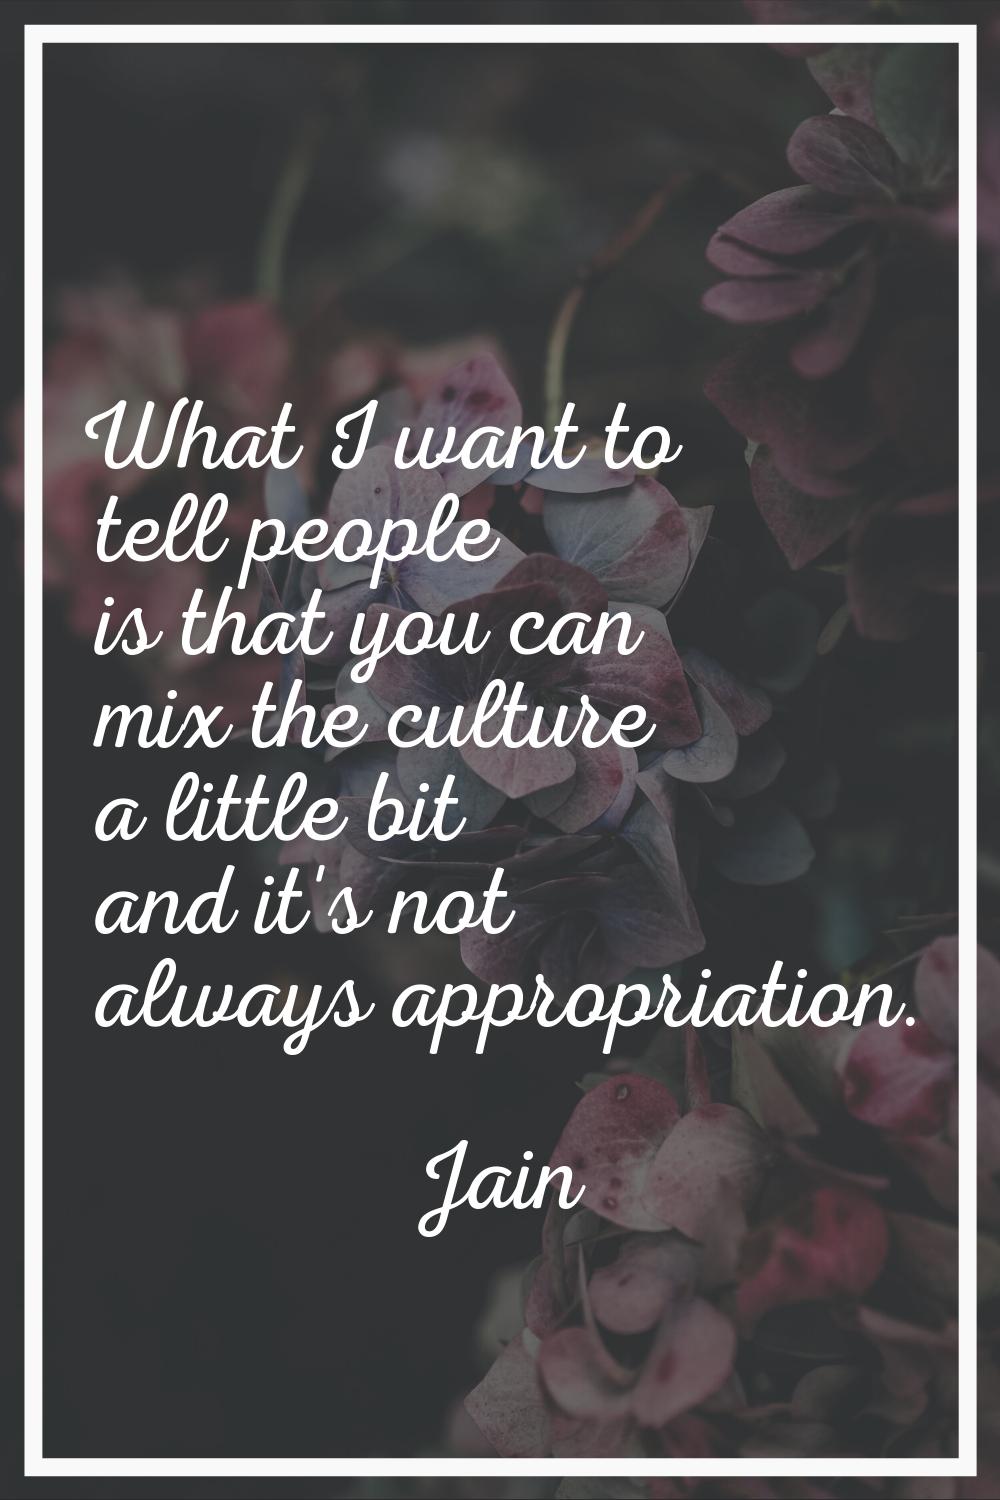 What I want to tell people is that you can mix the culture a little bit and it's not always appropr